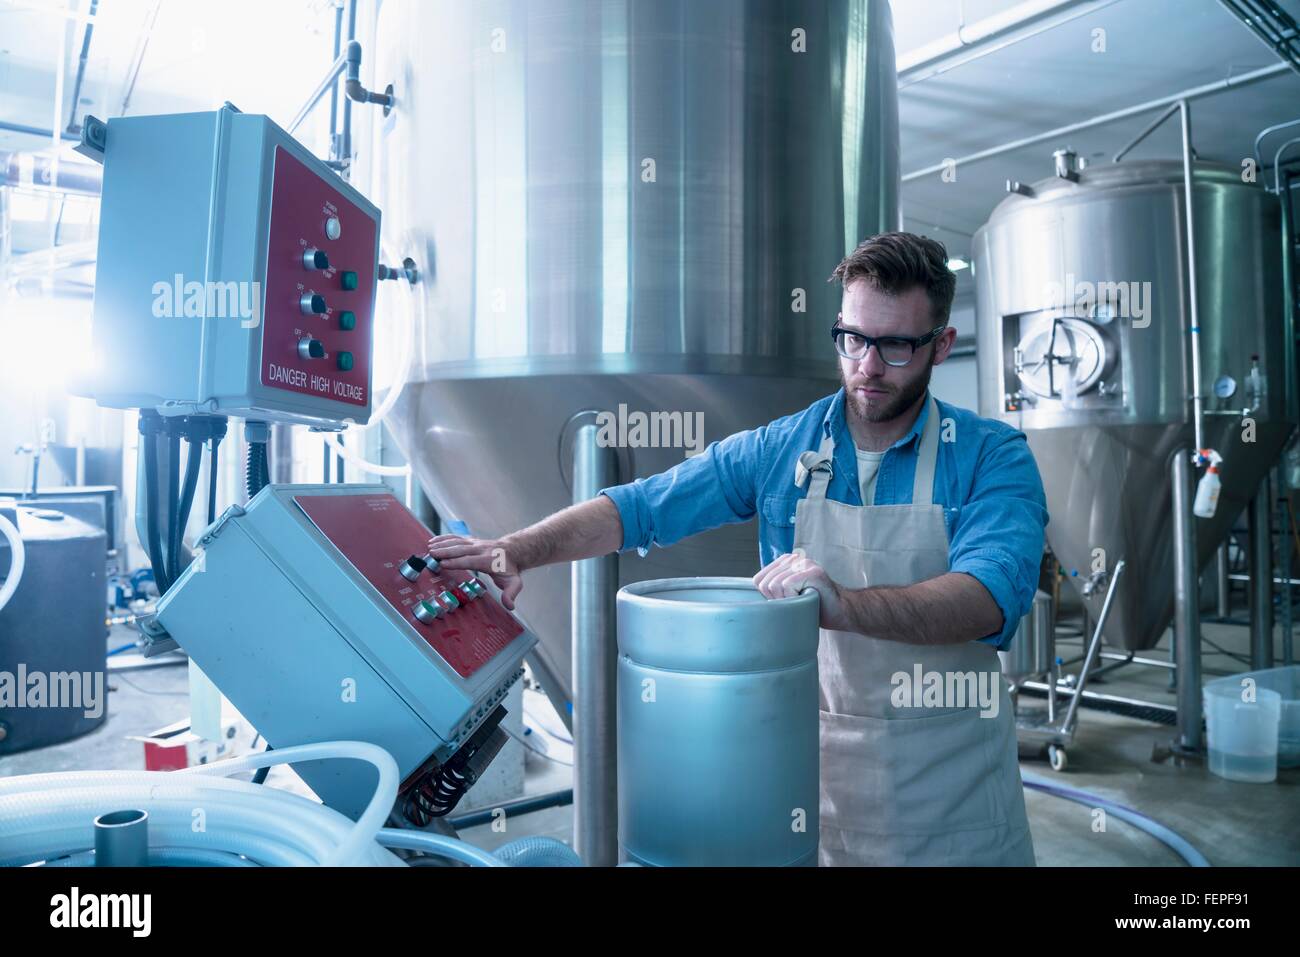 Young man in brewery by conical fermentation tank holding canister, pressing button on control panel Stock Photo